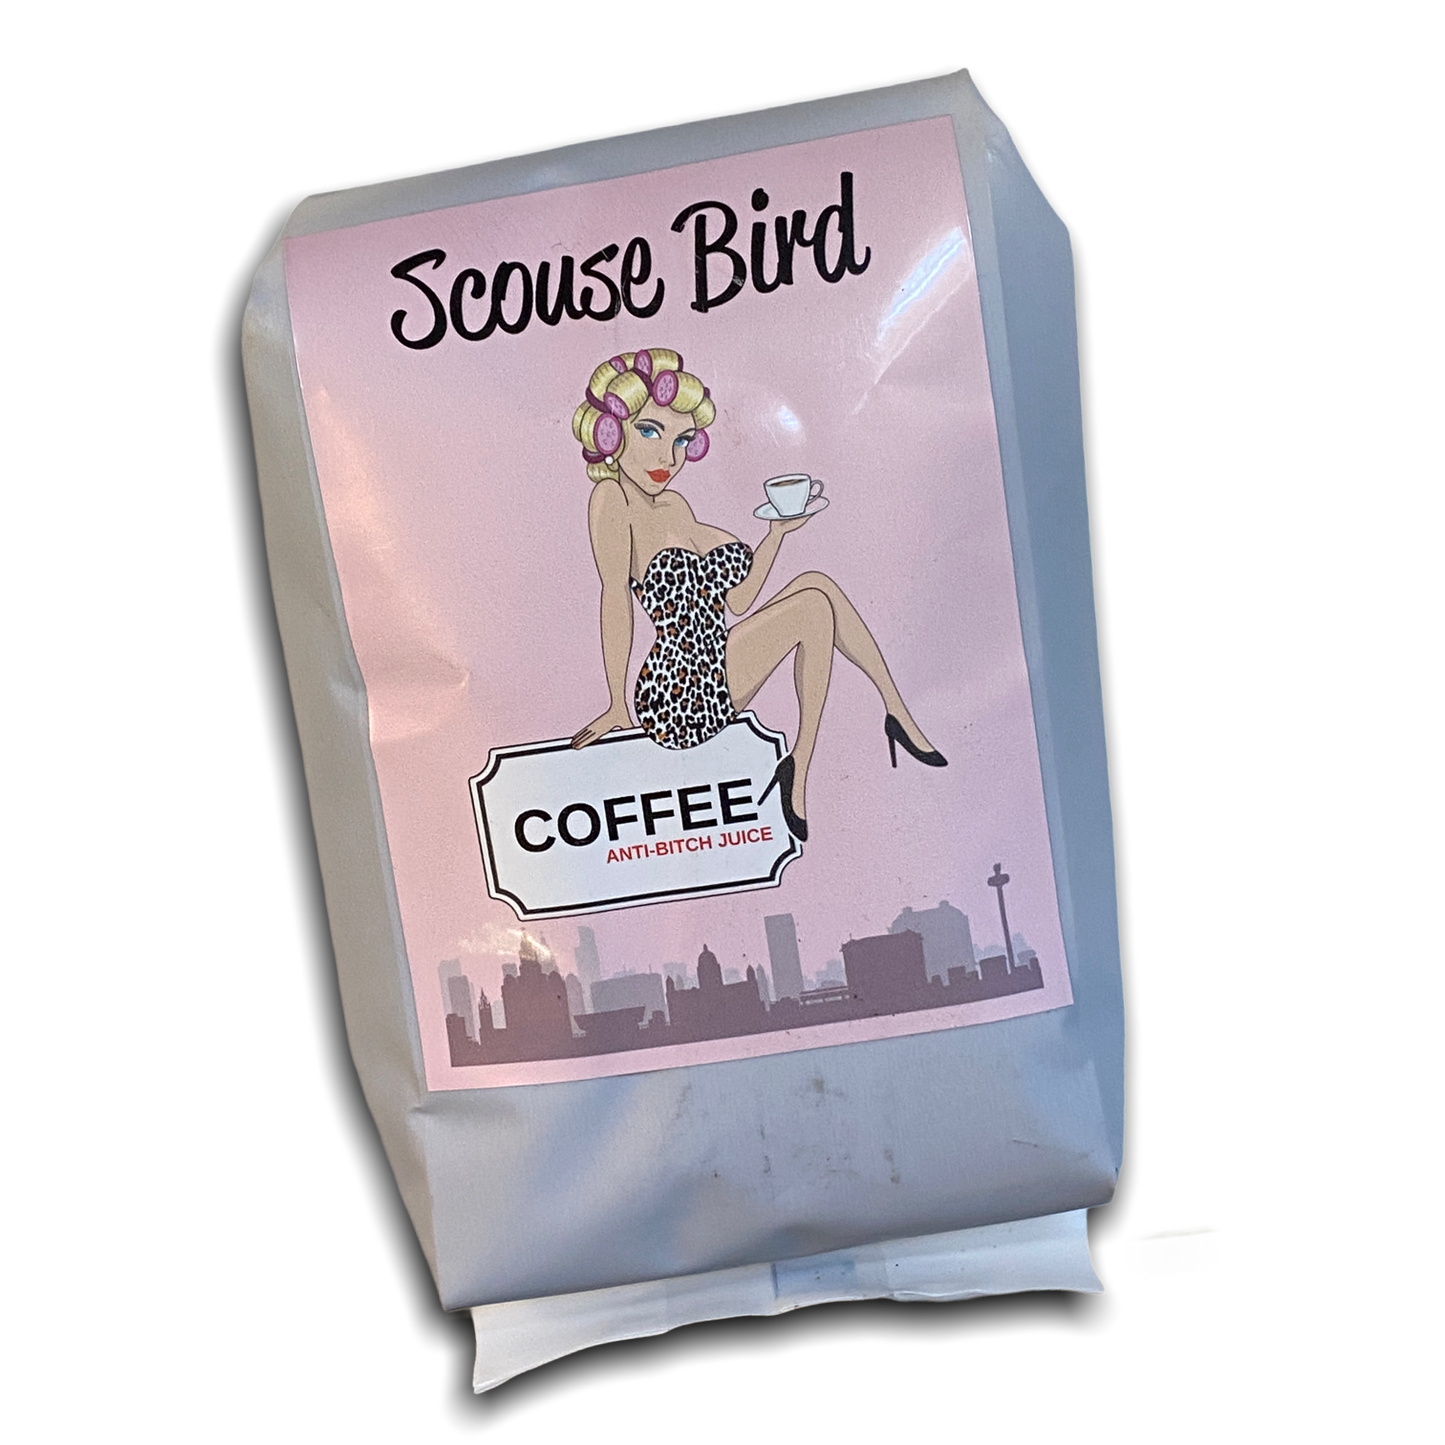 Load image into Gallery viewer, Scouse Bird Cafetiere Grind Coffee (200g)
